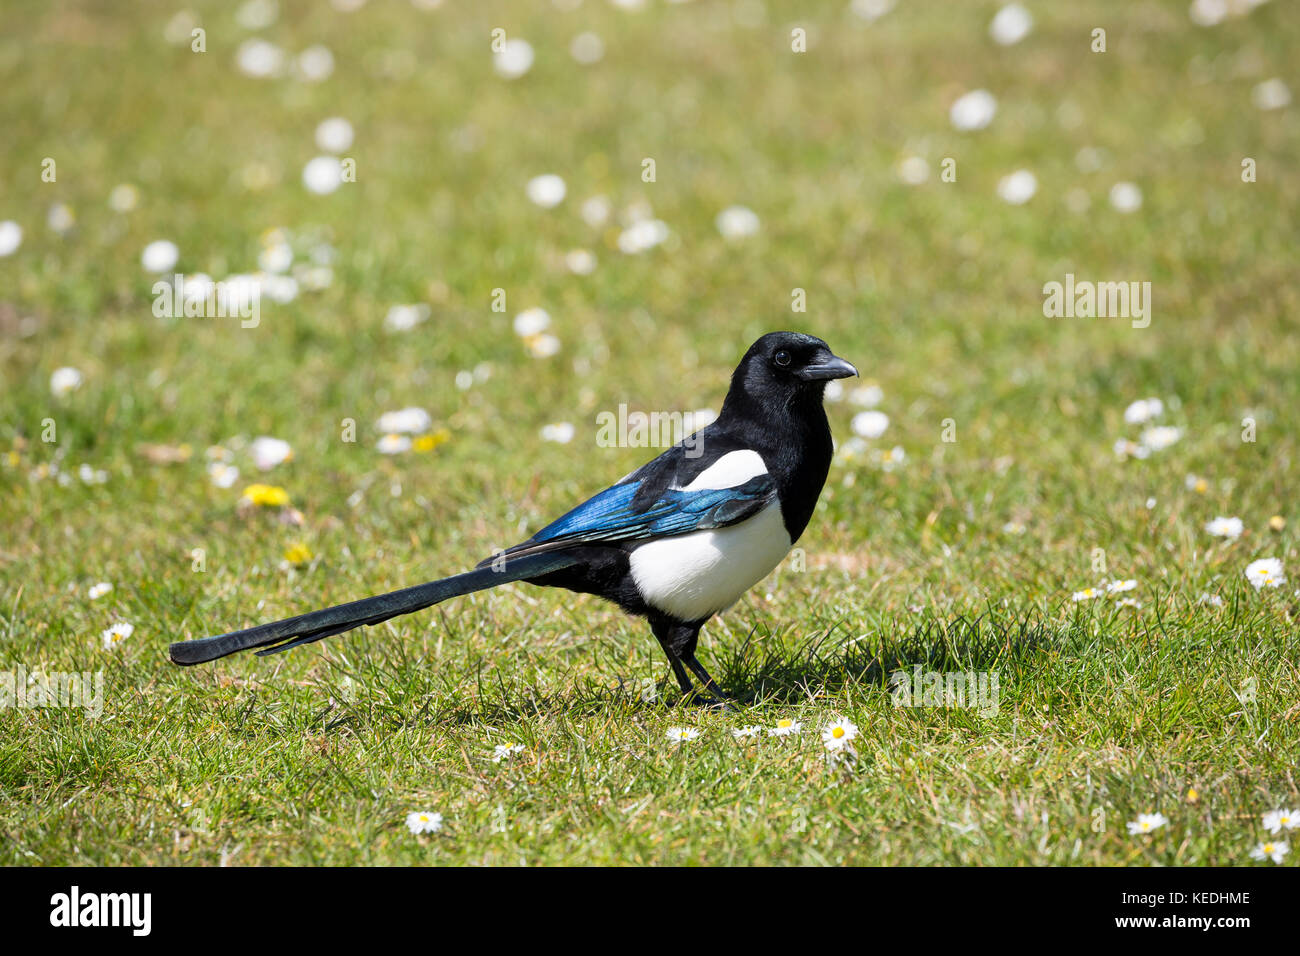 magpie on grass in sunshine Stock Photo